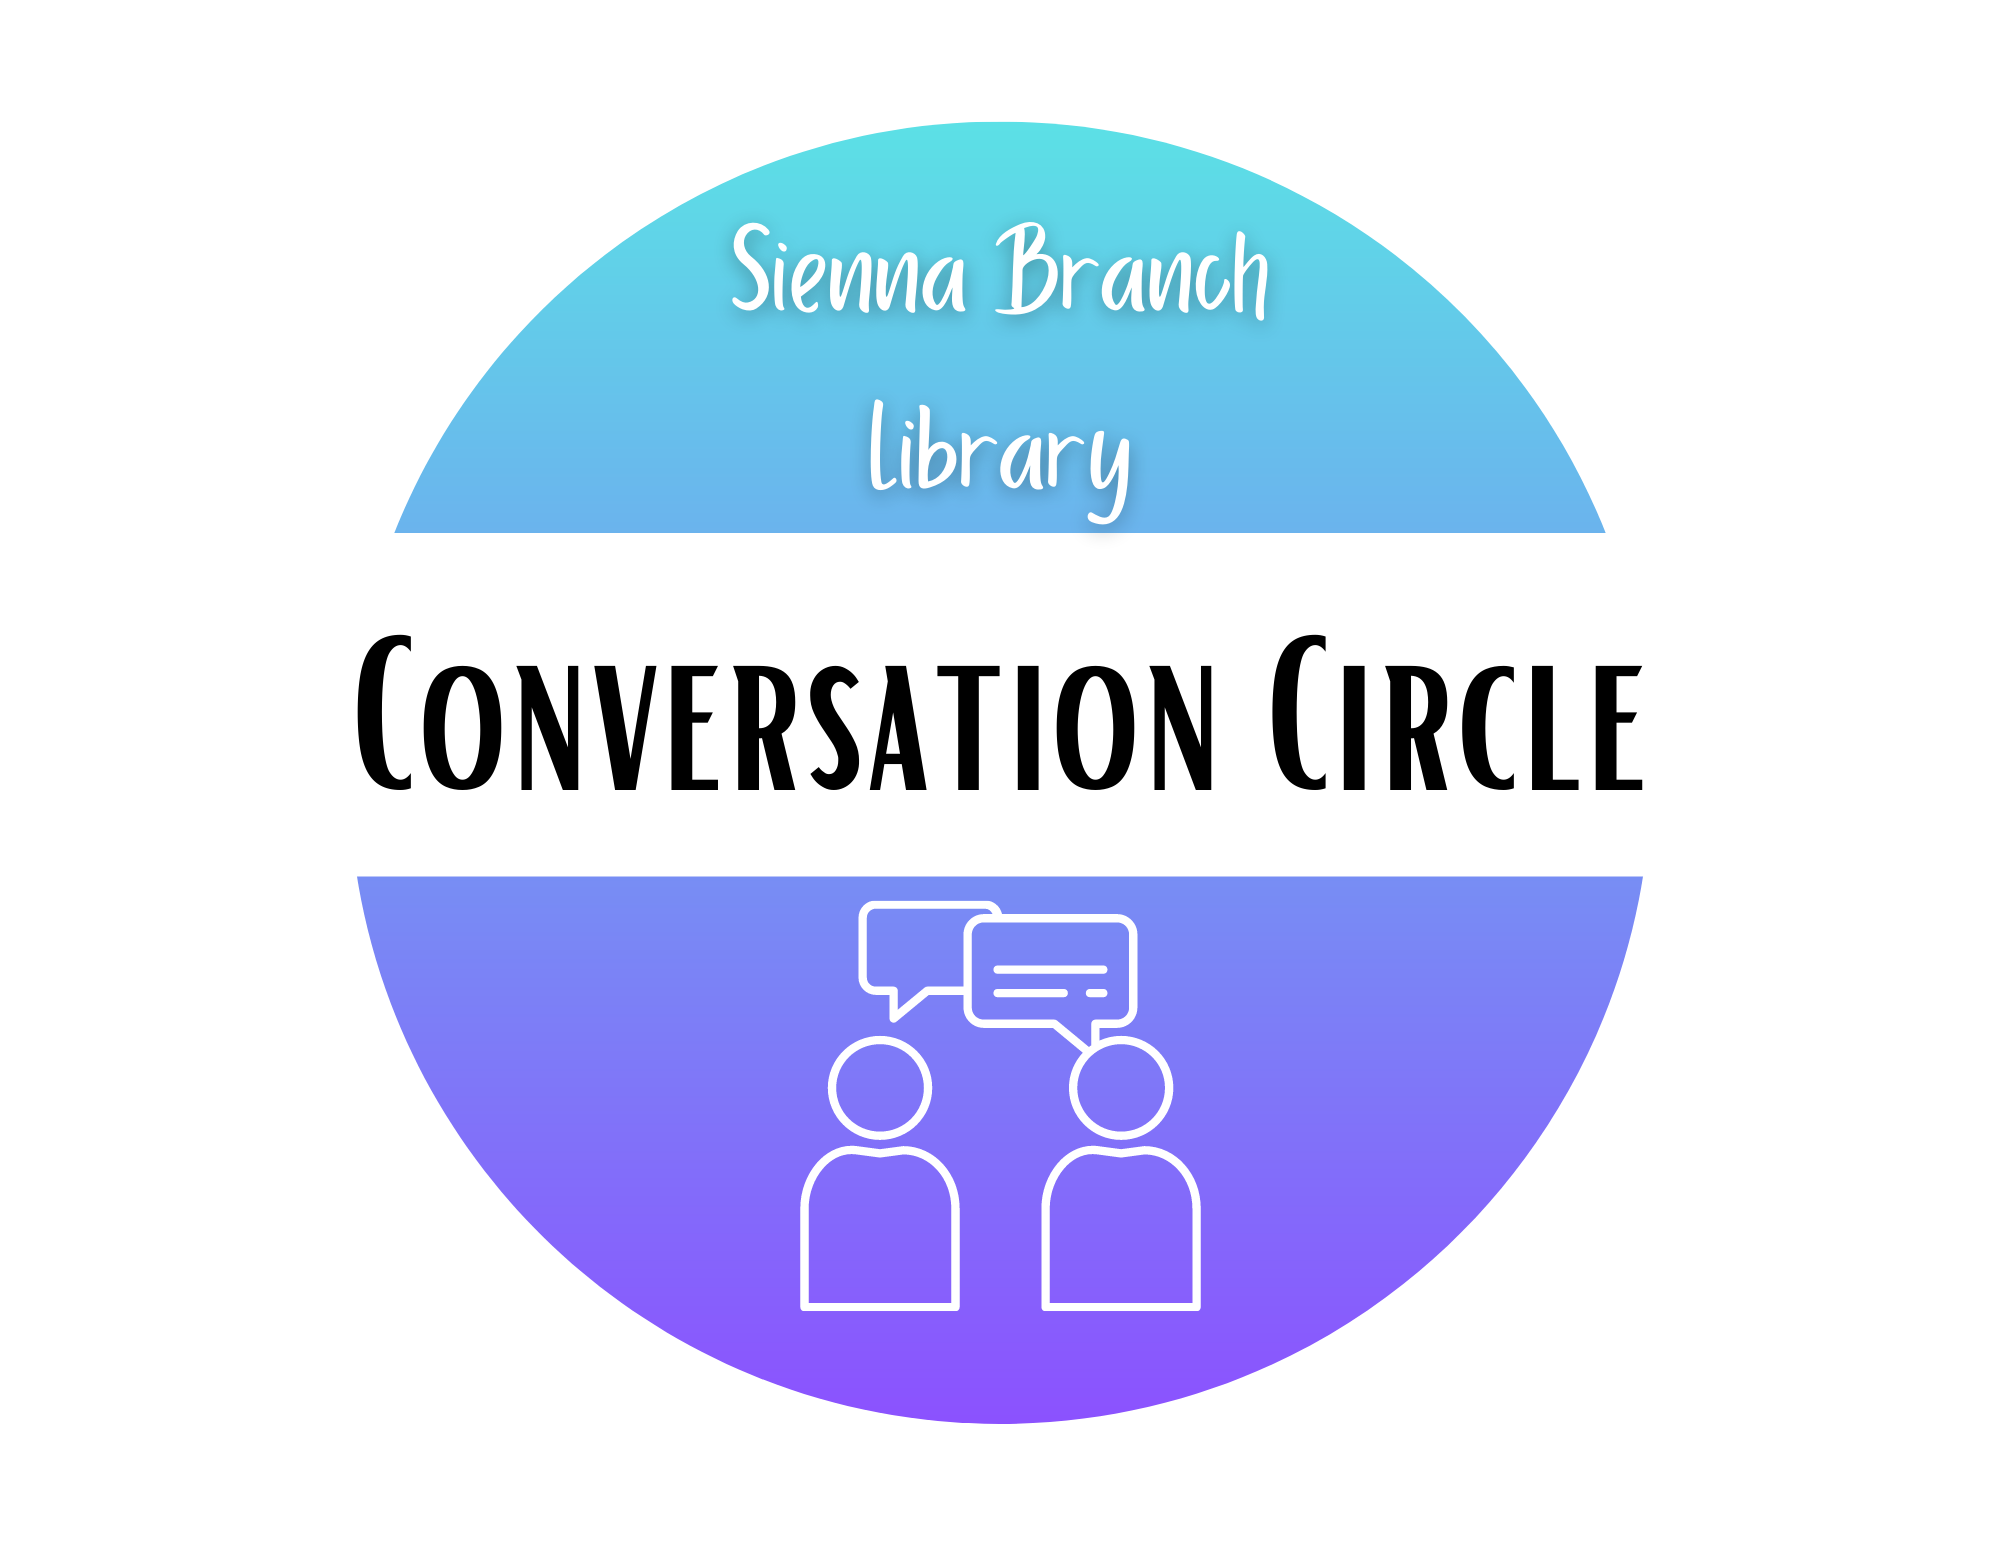 graphic of a gradient circle featuring abstract figures with speech bubbles with the text "Sienna Branch Library Conversation Circle"